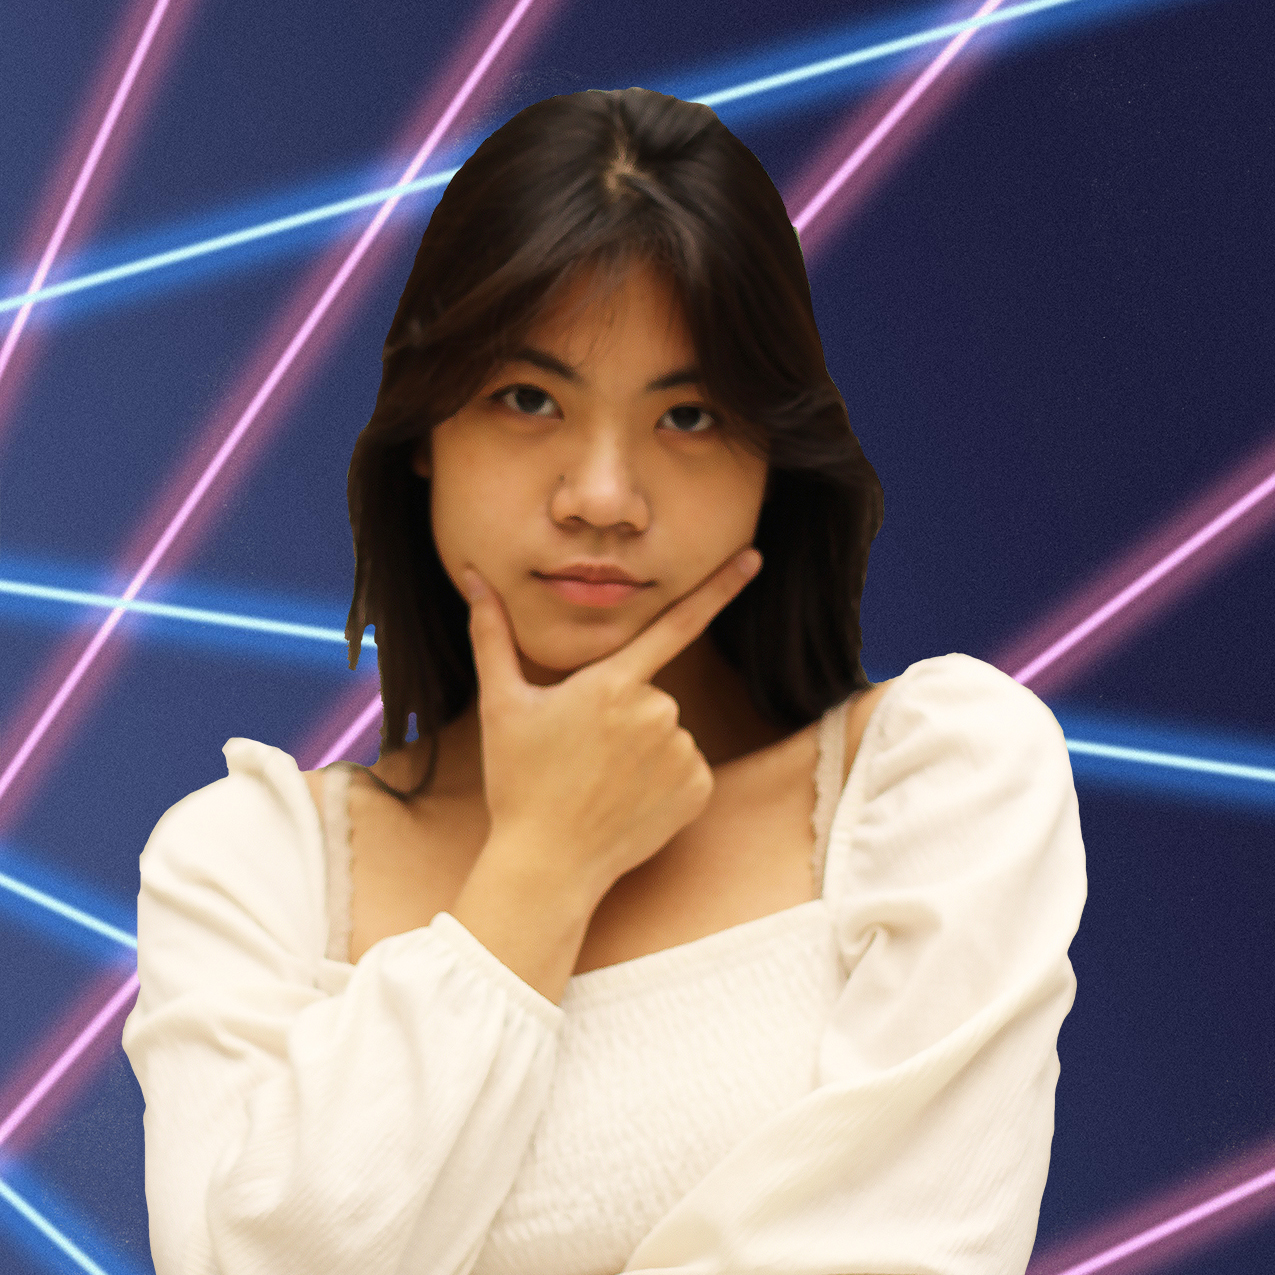 Cindy in front of laser background